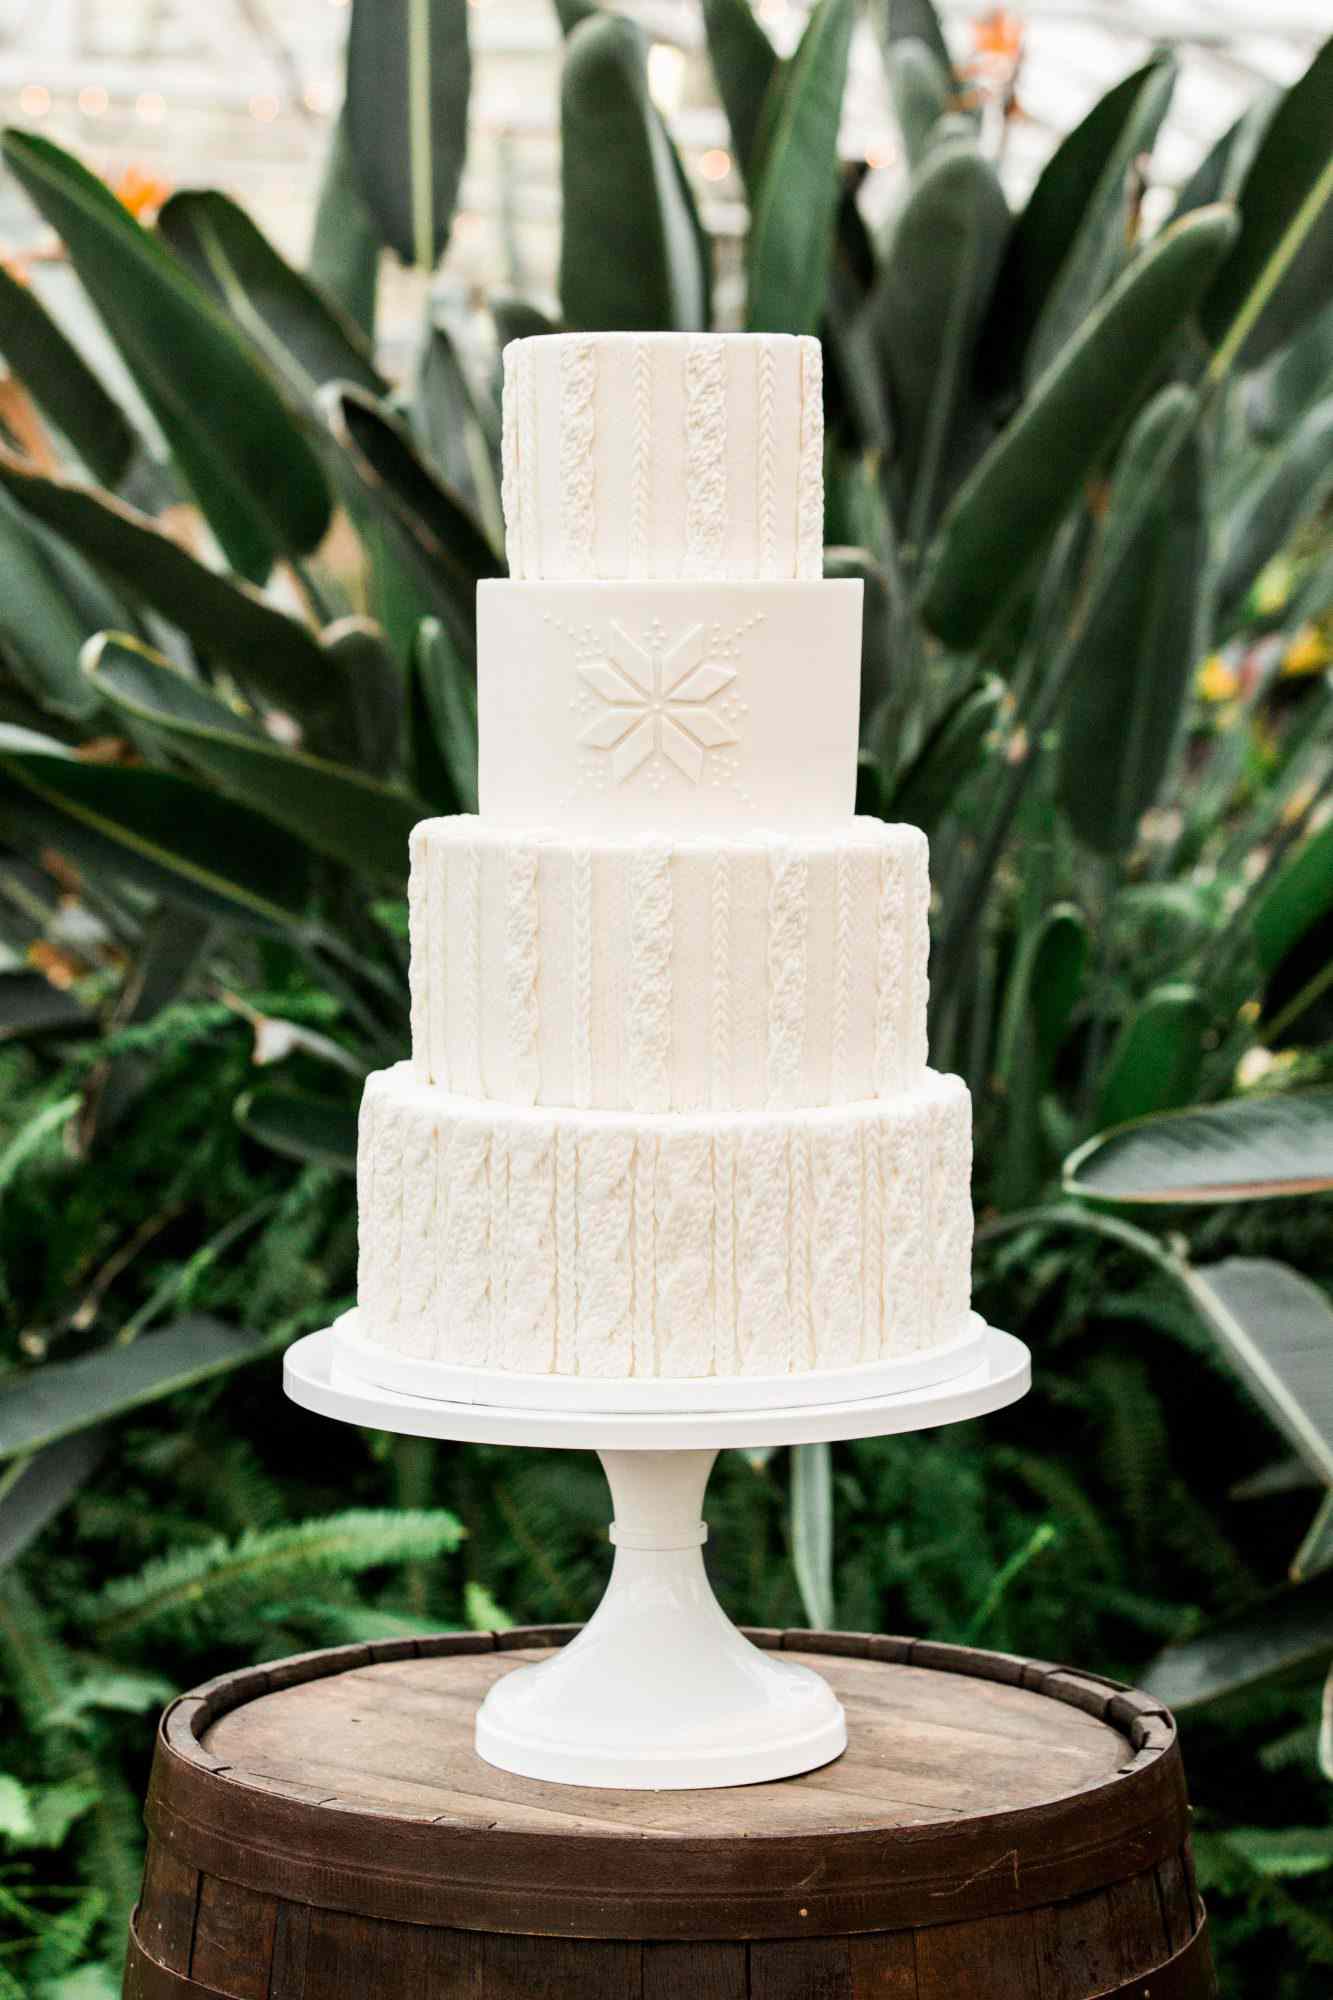 four tier wedding cake with sweater design